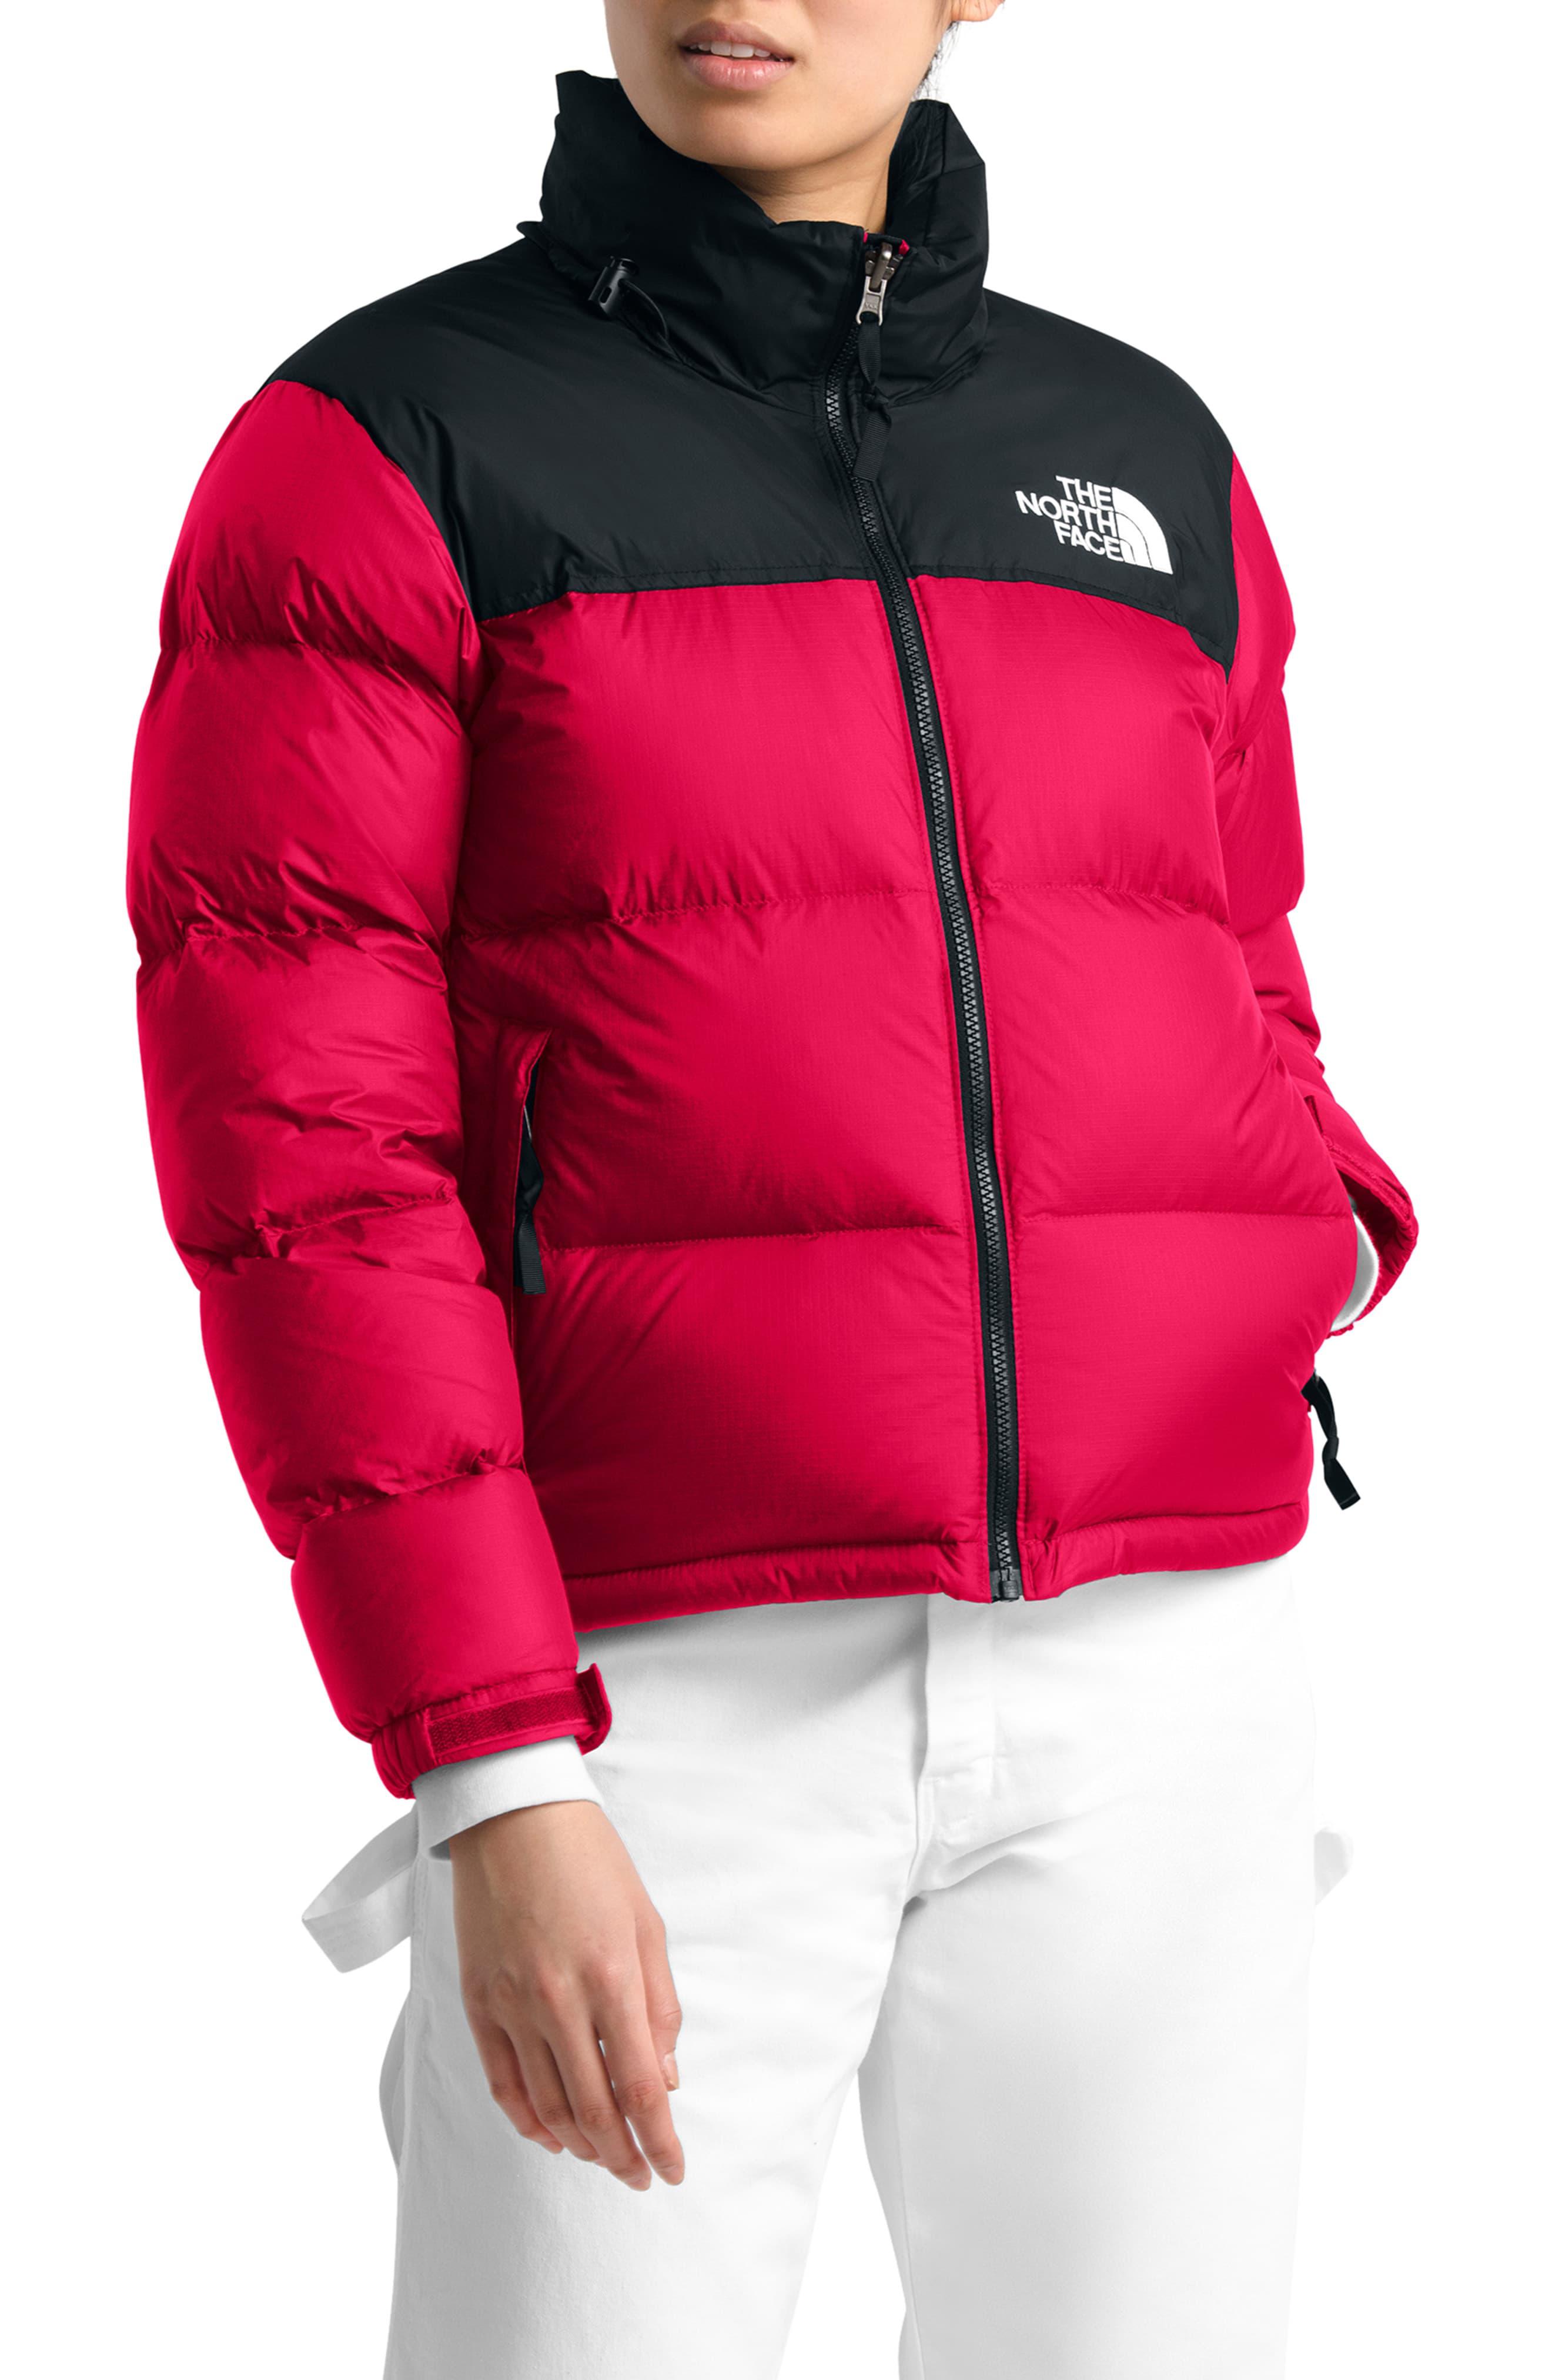 placard Disarmament bar The North Face 1996 Retro Nuptse Jacket in Red | Lyst